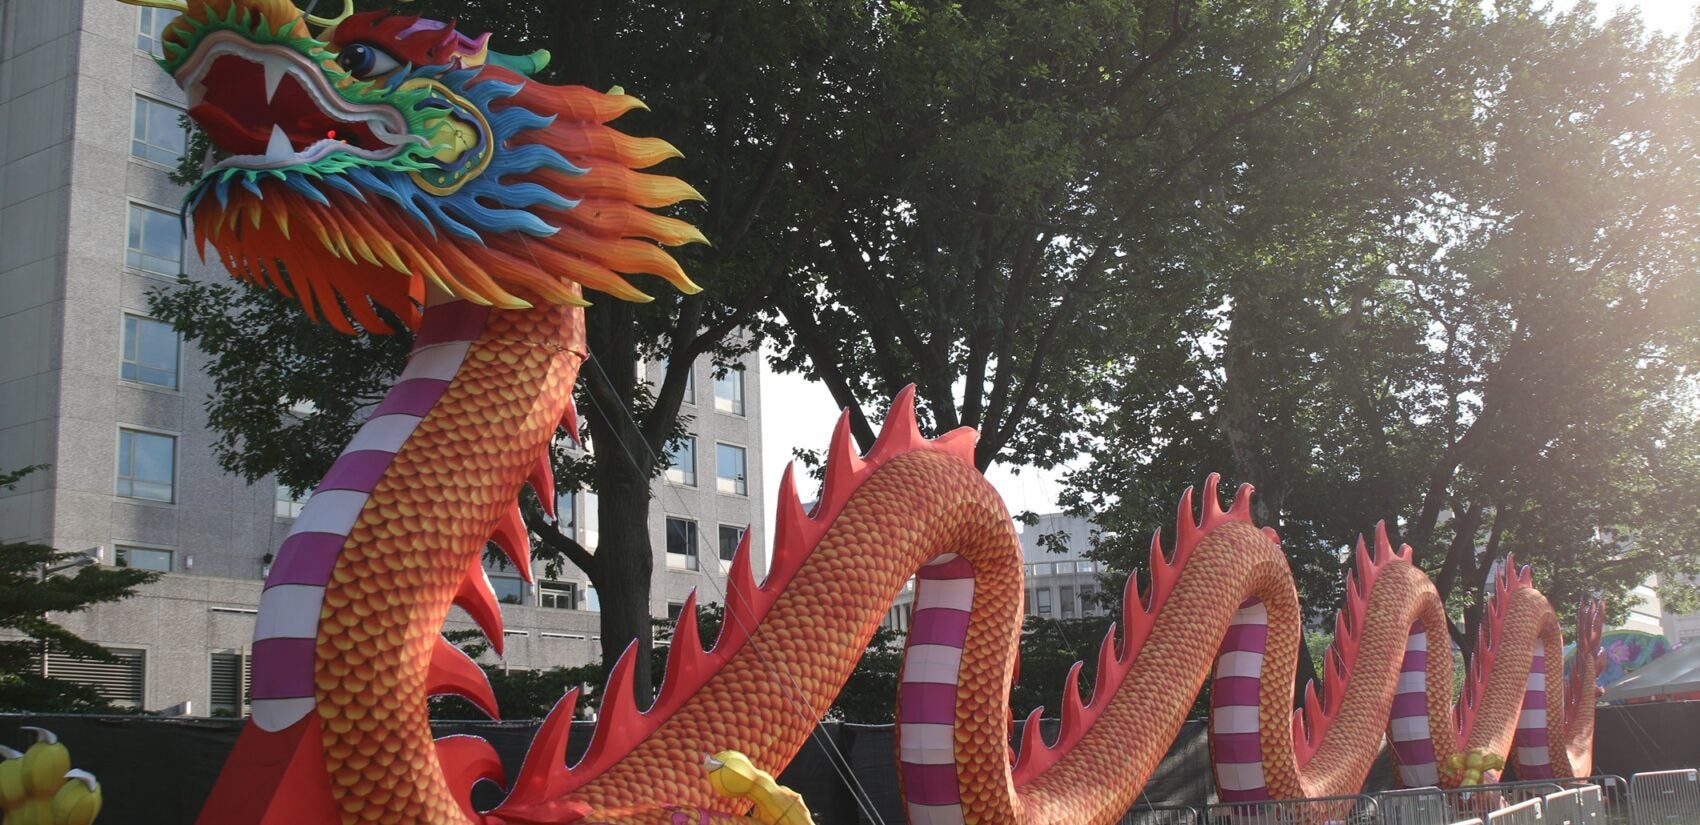 The 164-foot-long dragon is longer than three school buses and weighs 6,000 pounds. Standing at 21 feet high, the head was installed with a 15-person crew. More than 70 pieces make up this one lantern. (Cory Sharber/WHYY)